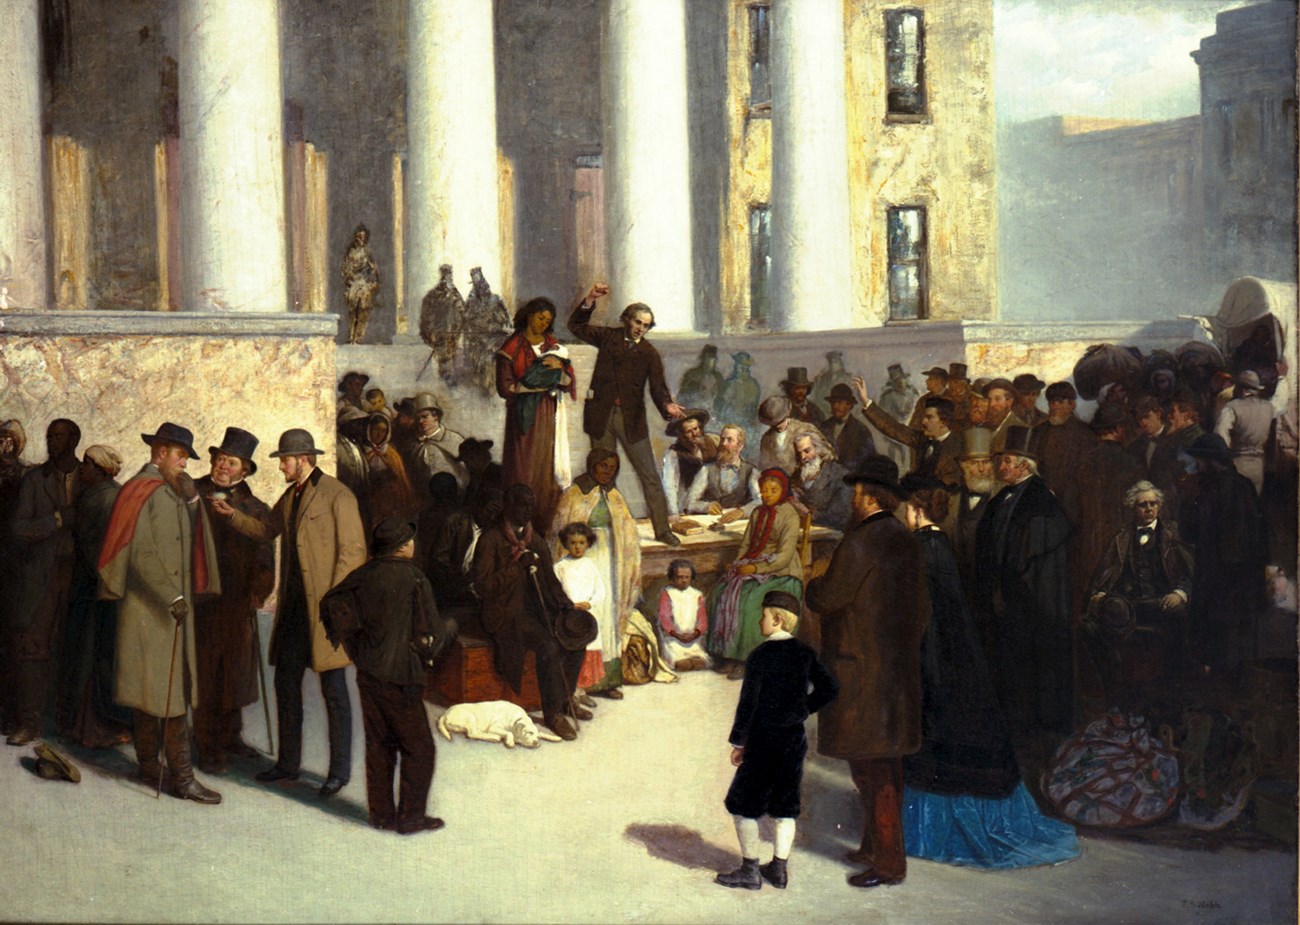 The image is of a scene on St. Louis Court House steps, January 1, 1861, when a group of abolitionists bid deliberately low to undermine the practice of selling slaves